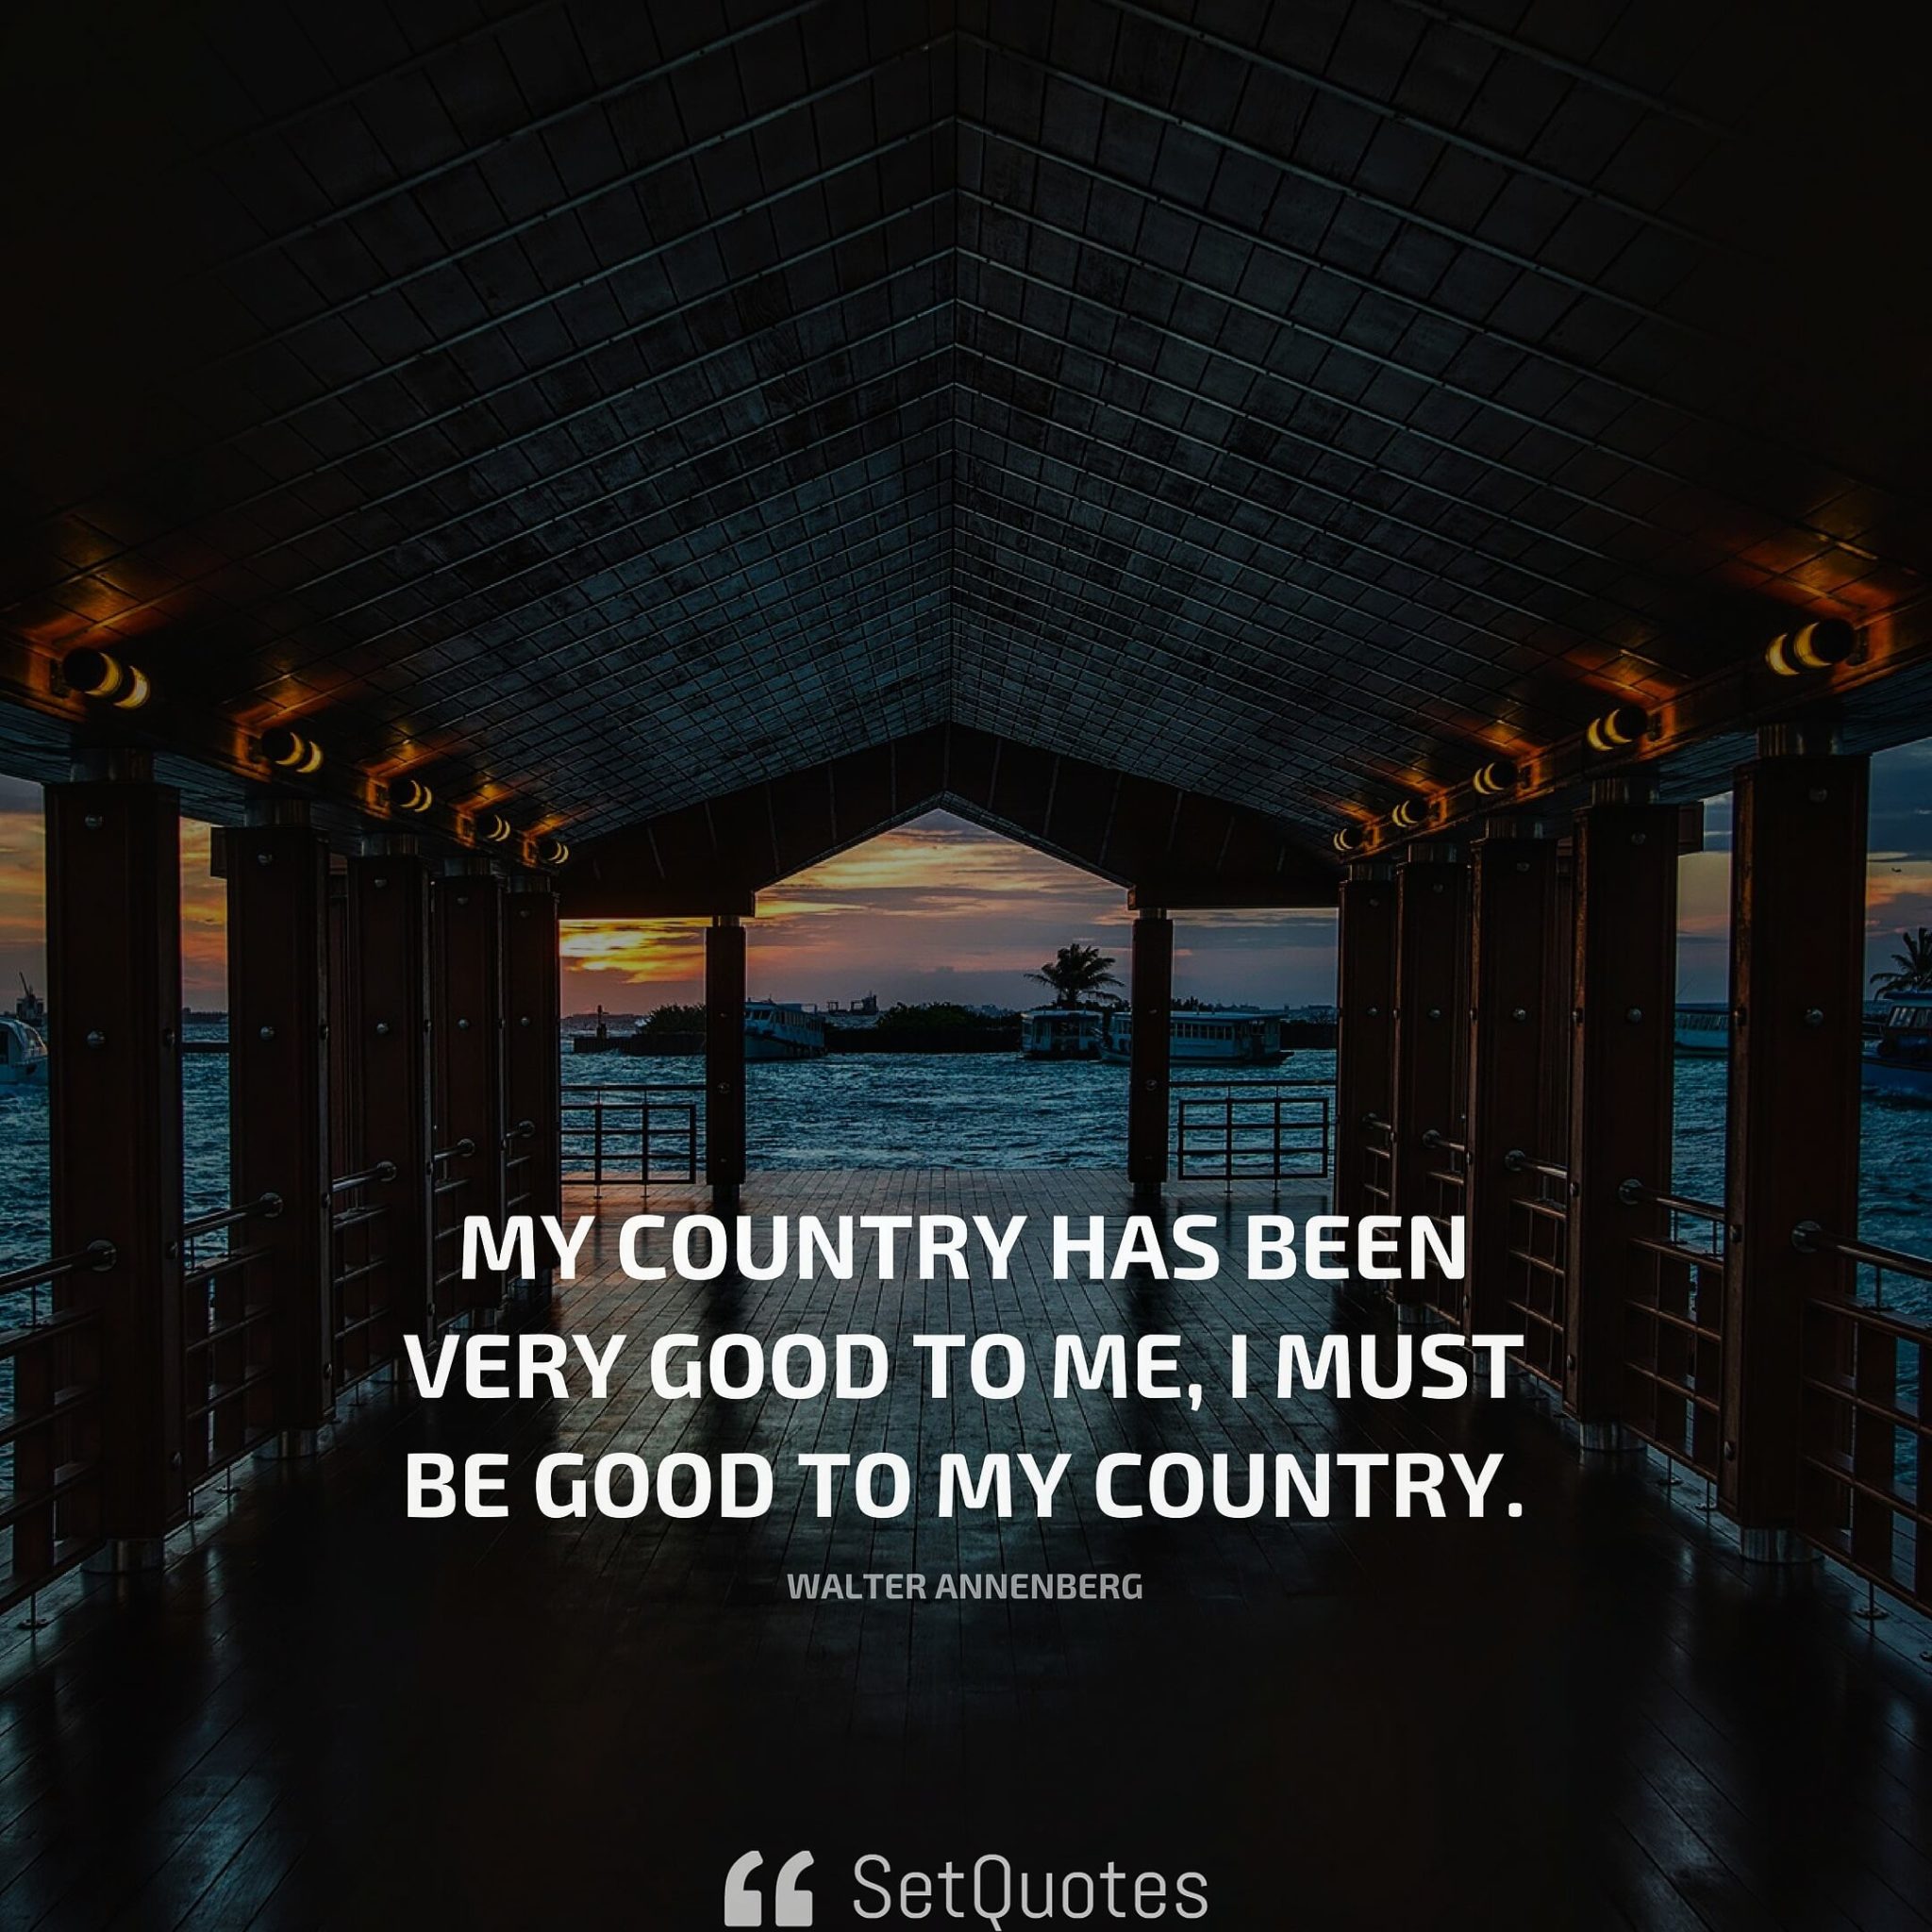 My country has been very good to me, I must be good to my country. - Walter Annenberg